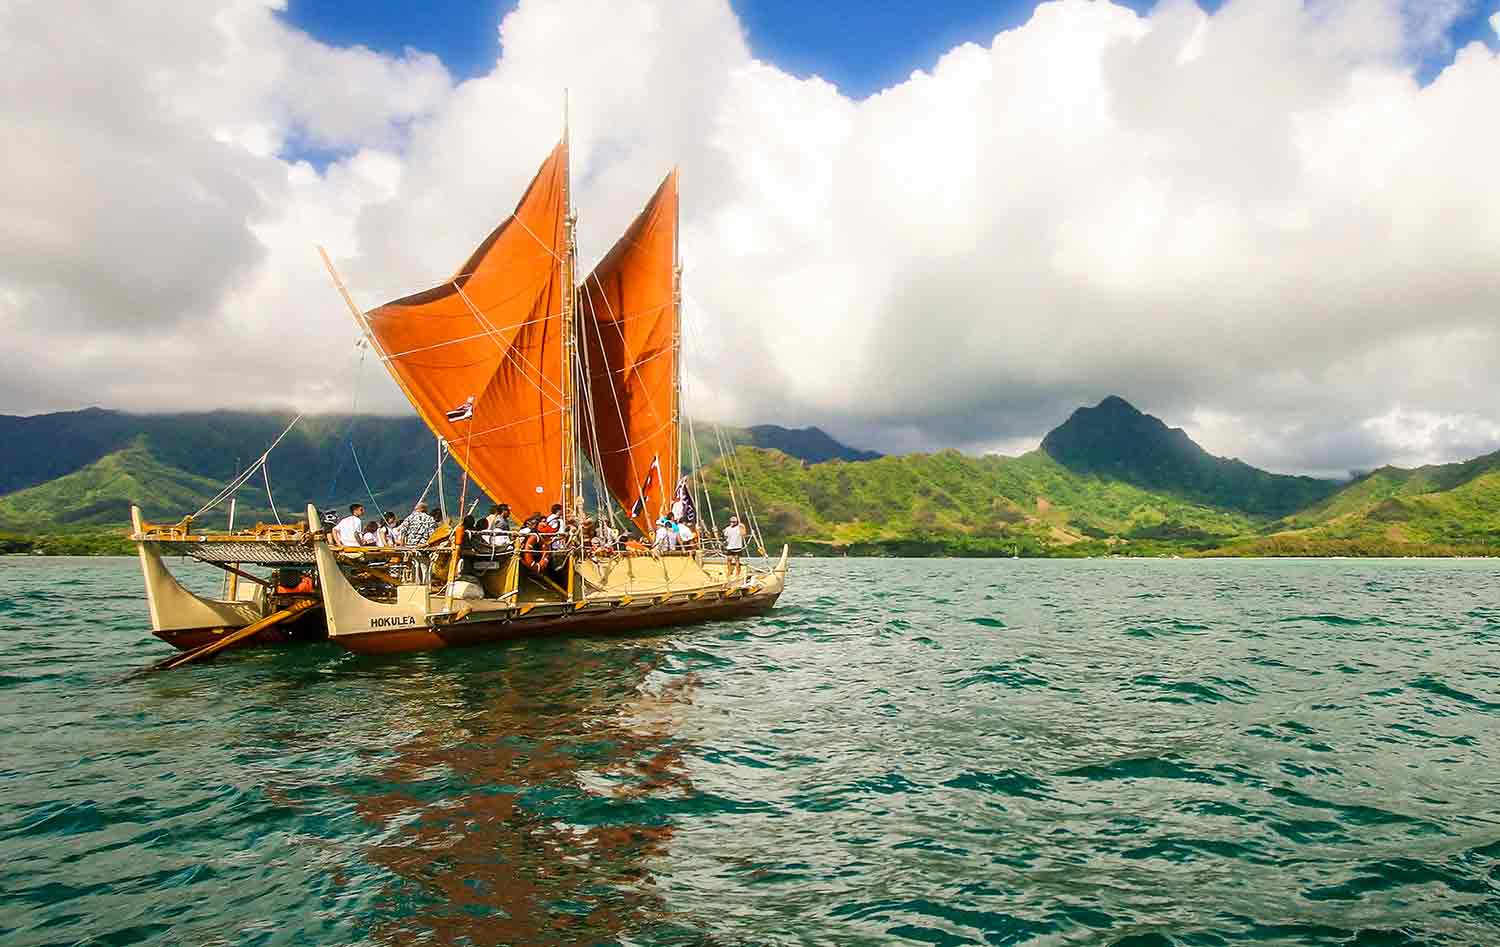 A replica of an ancient canoe with orange sails carries several people on a body of water with green mountains in the background.